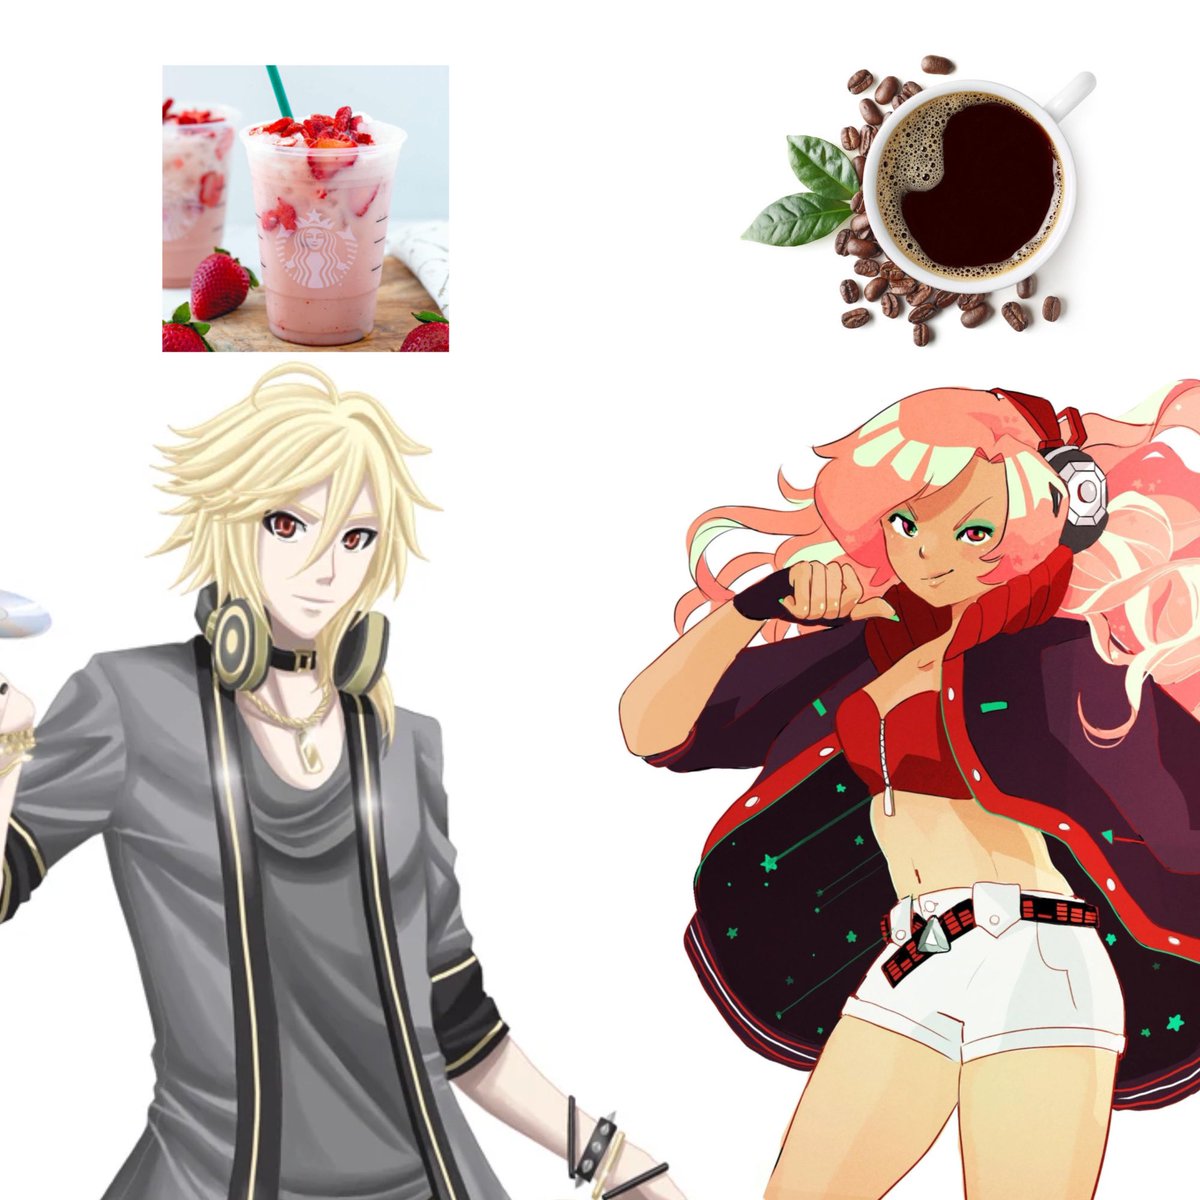 I was thinking of Starbucks and this came to me kdjsjdh 

#yohioloid #rubyvocaloid